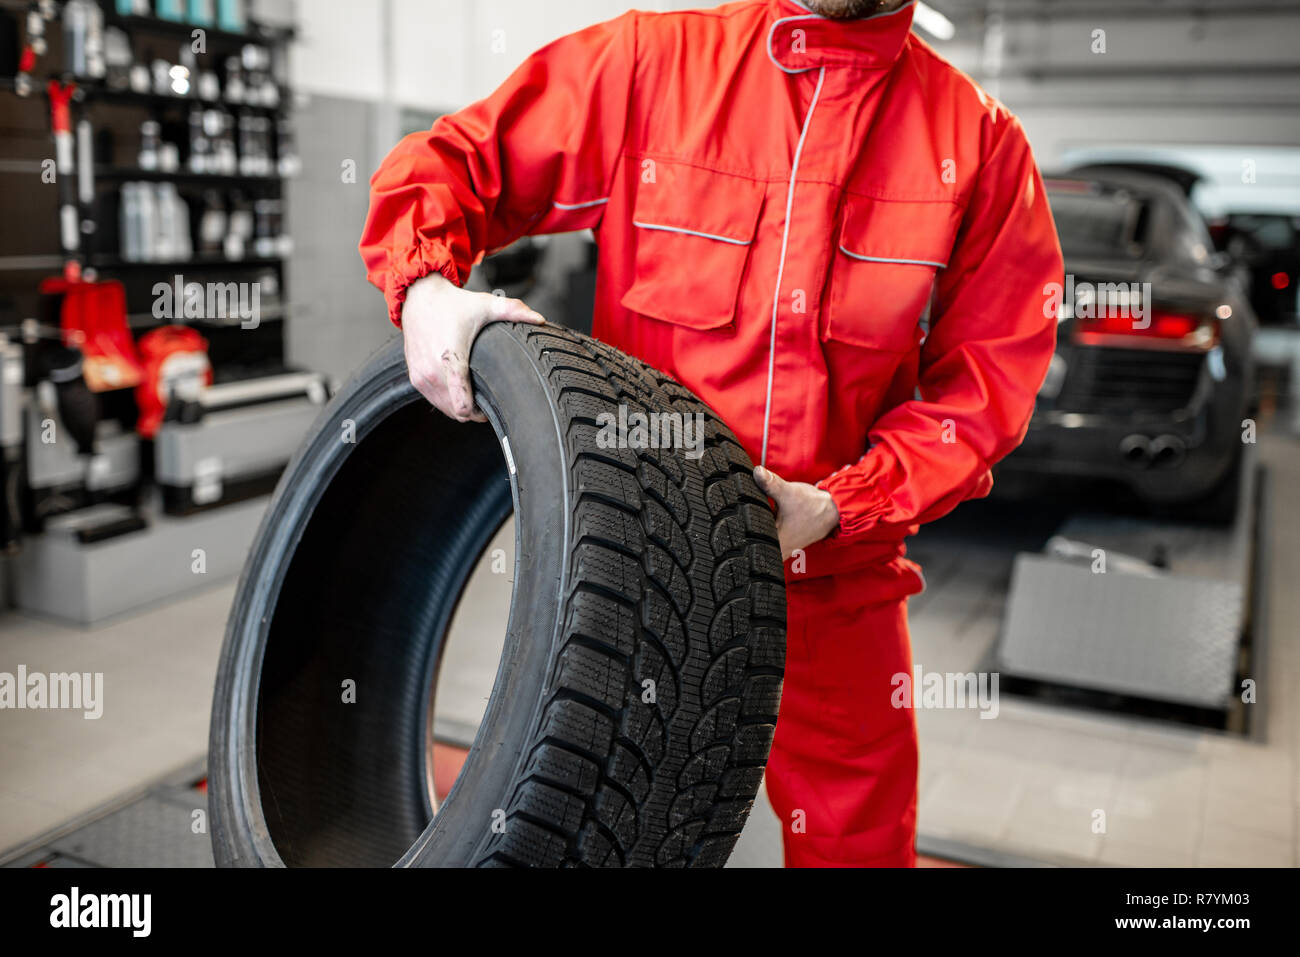 Worker in uniform carrying new tires at the car service or store, close-up view Stock Photo